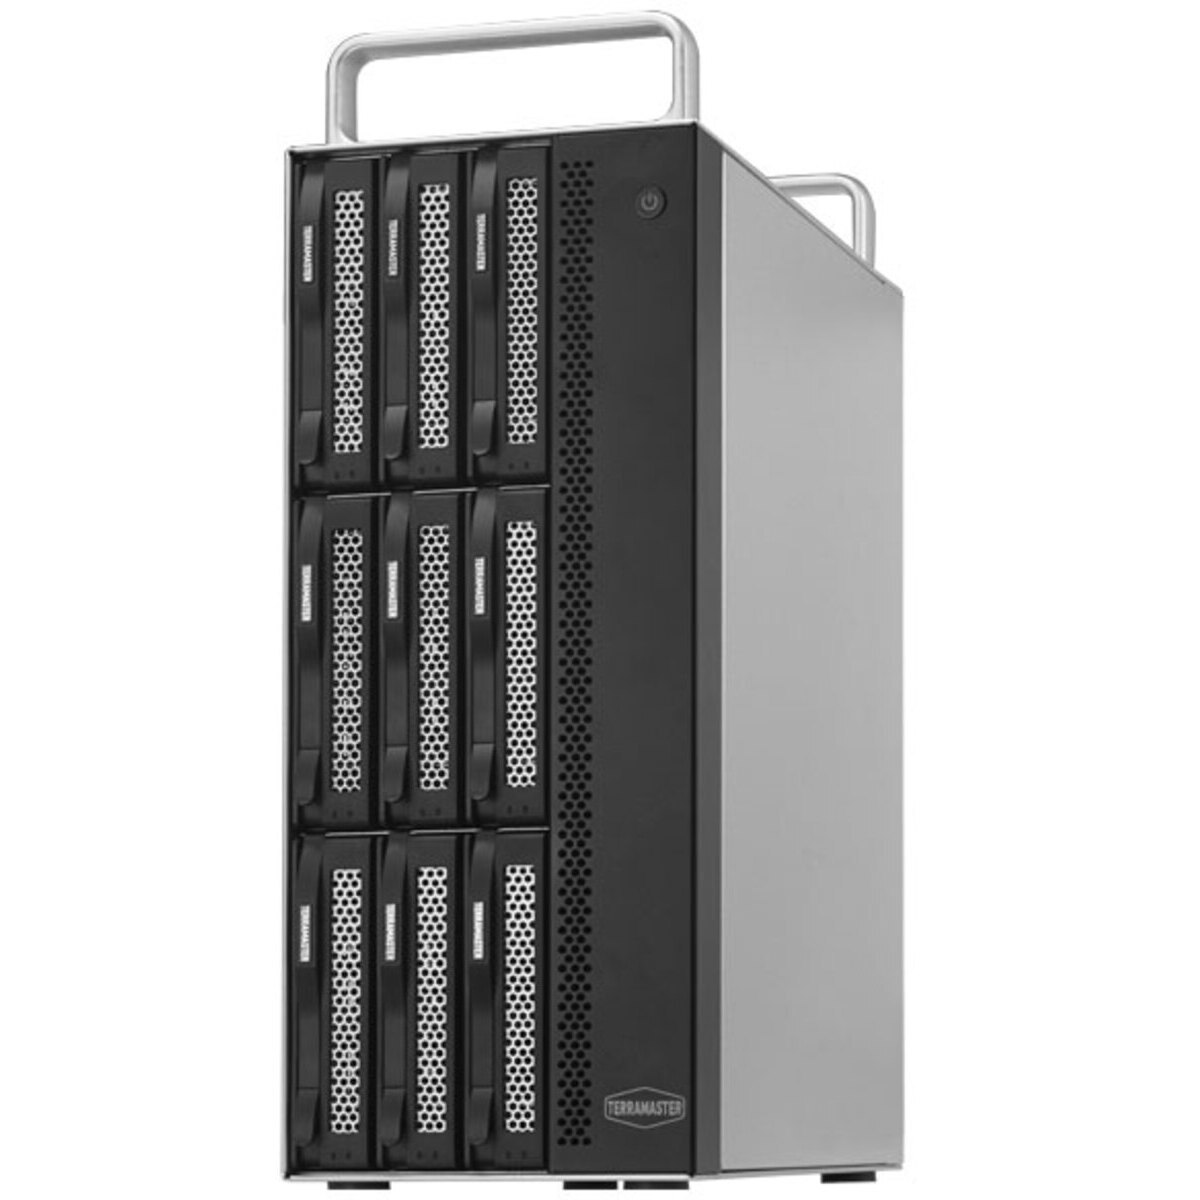 TerraMaster D8-322 56tb 8-Bay Desktop Multimedia / Power User / Business DAS - Direct Attached Storage Device 4x14tb Seagate EXOS X18 ST14000NM000J 3.5 7200rpm SATA 6Gb/s HDD ENTERPRISE Class Drives Installed - Burn-In Tested D8-322